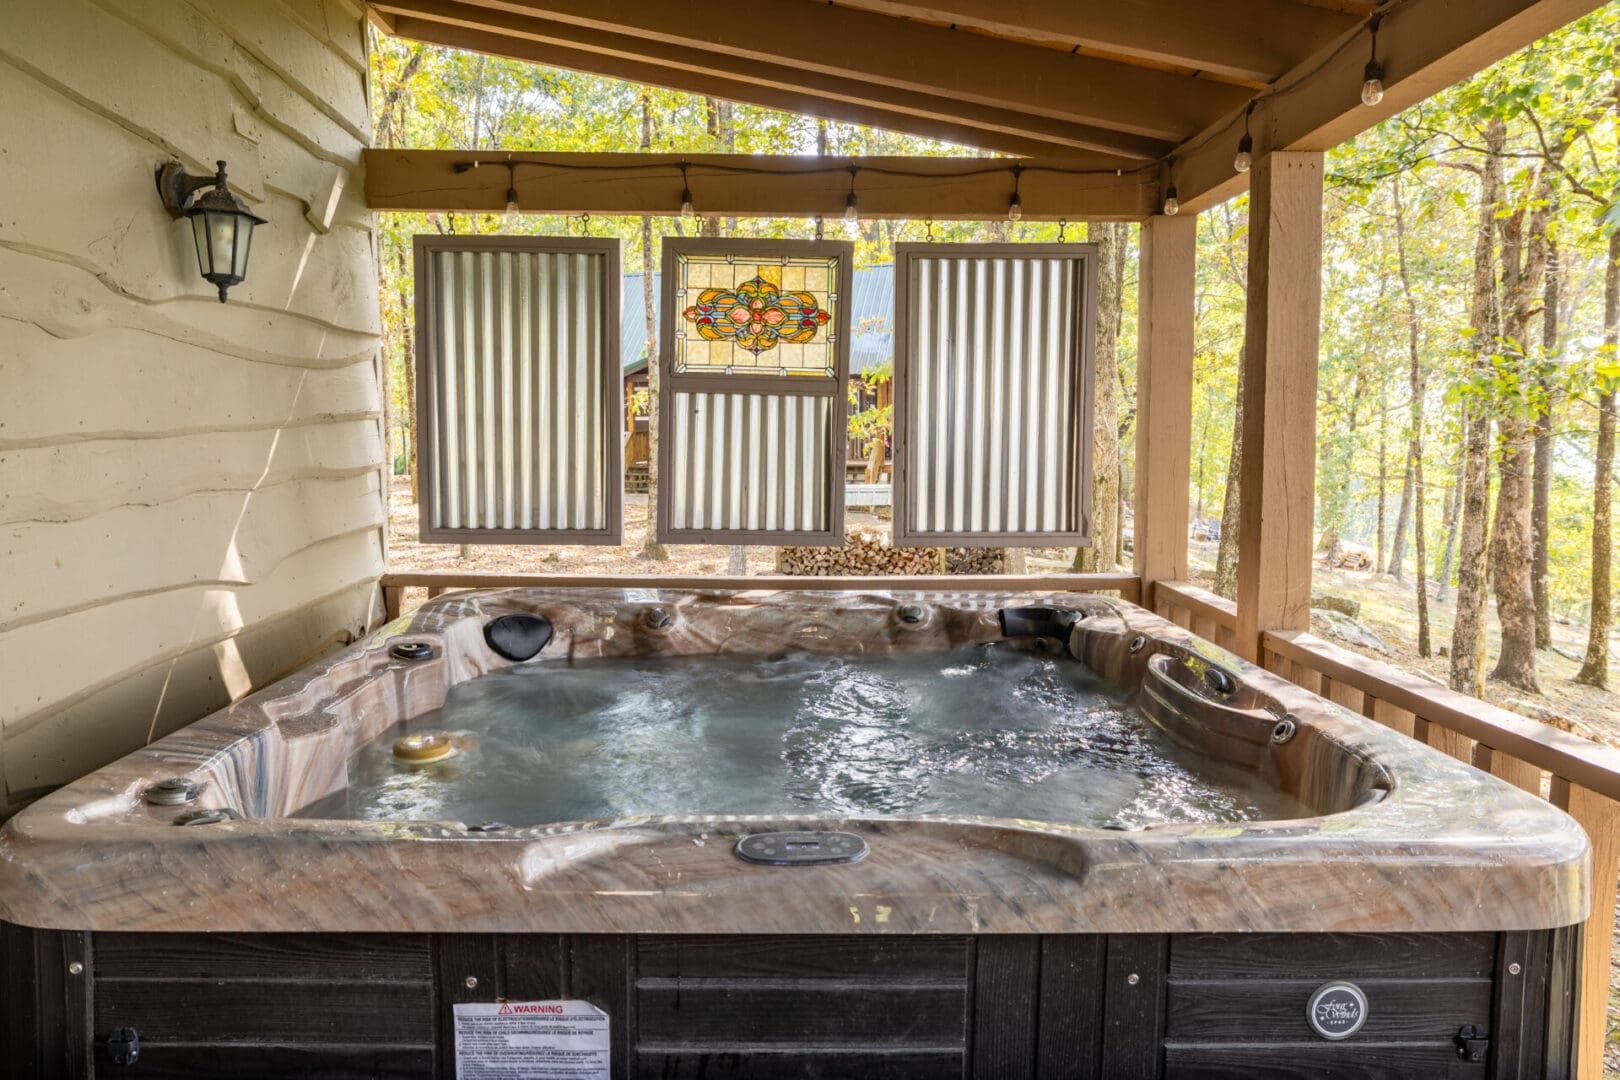 A hot tub on the porch of a cabin.